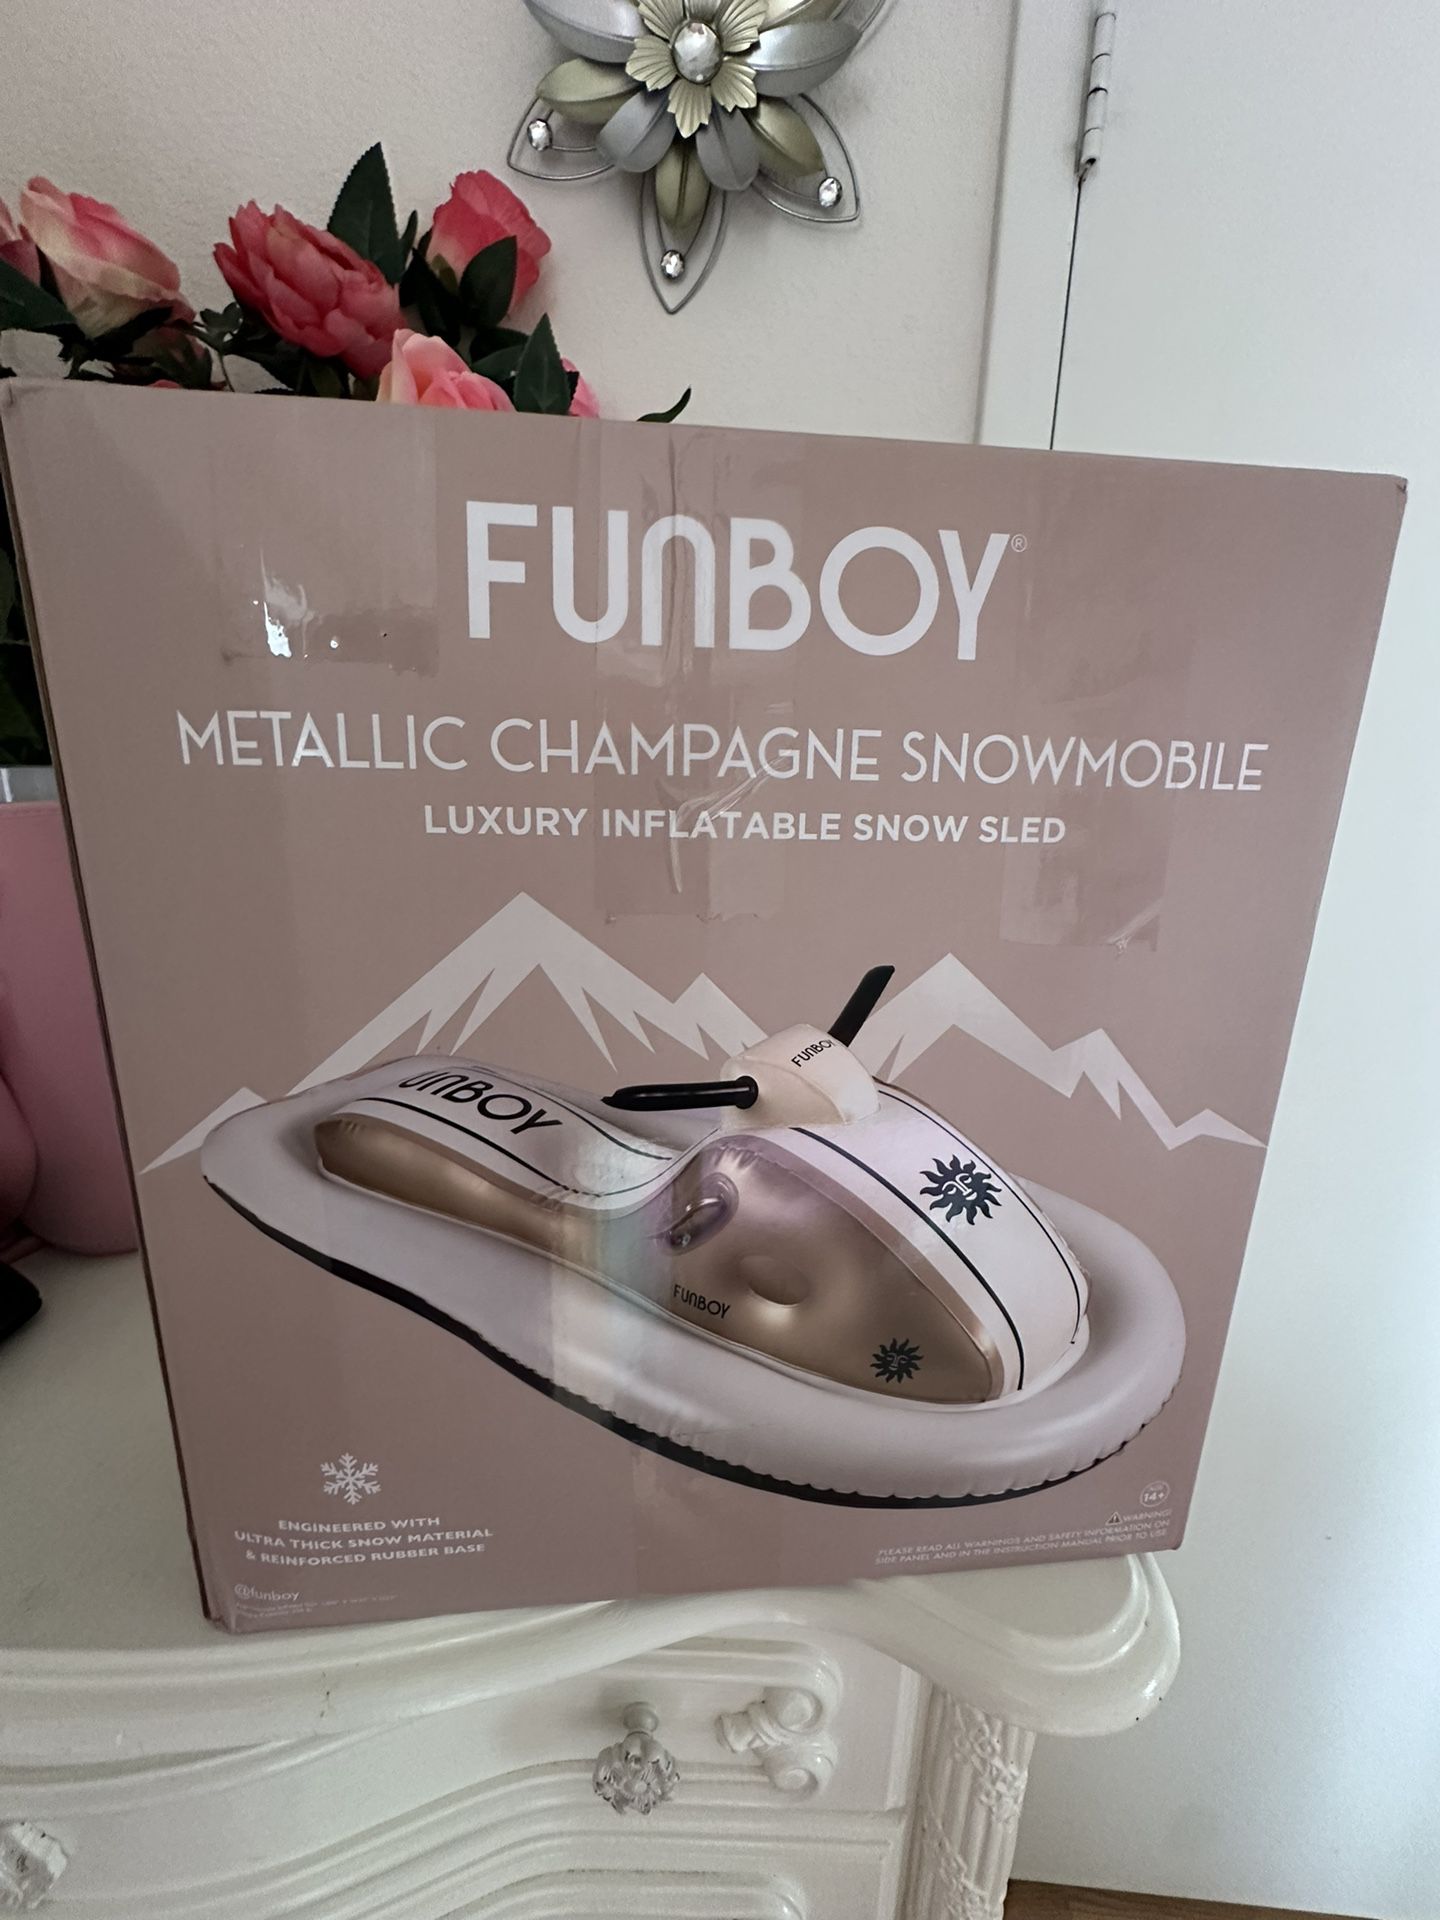 FunBoy Snowmobile Inflatable Snow Sled  ❄️ ☃️ 🏂